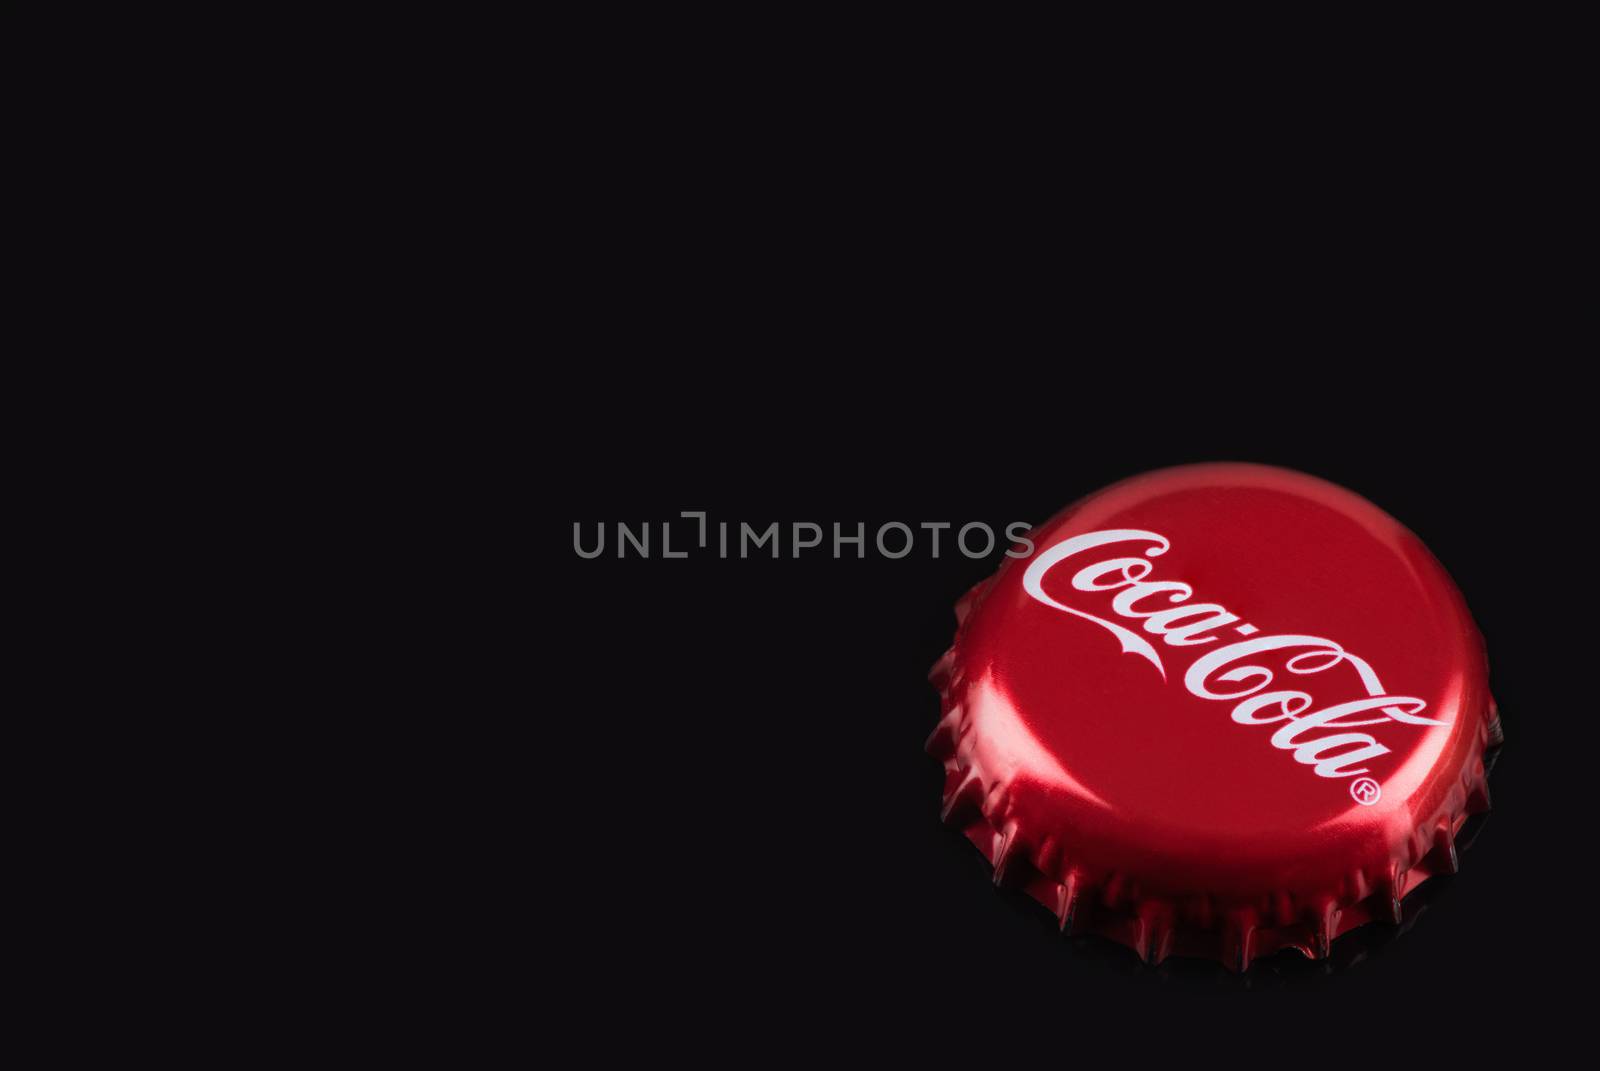 TARNOW, POLAND - FEBRUARY 01, 2020: Classic Red Coca-Cola Bottle by merc67